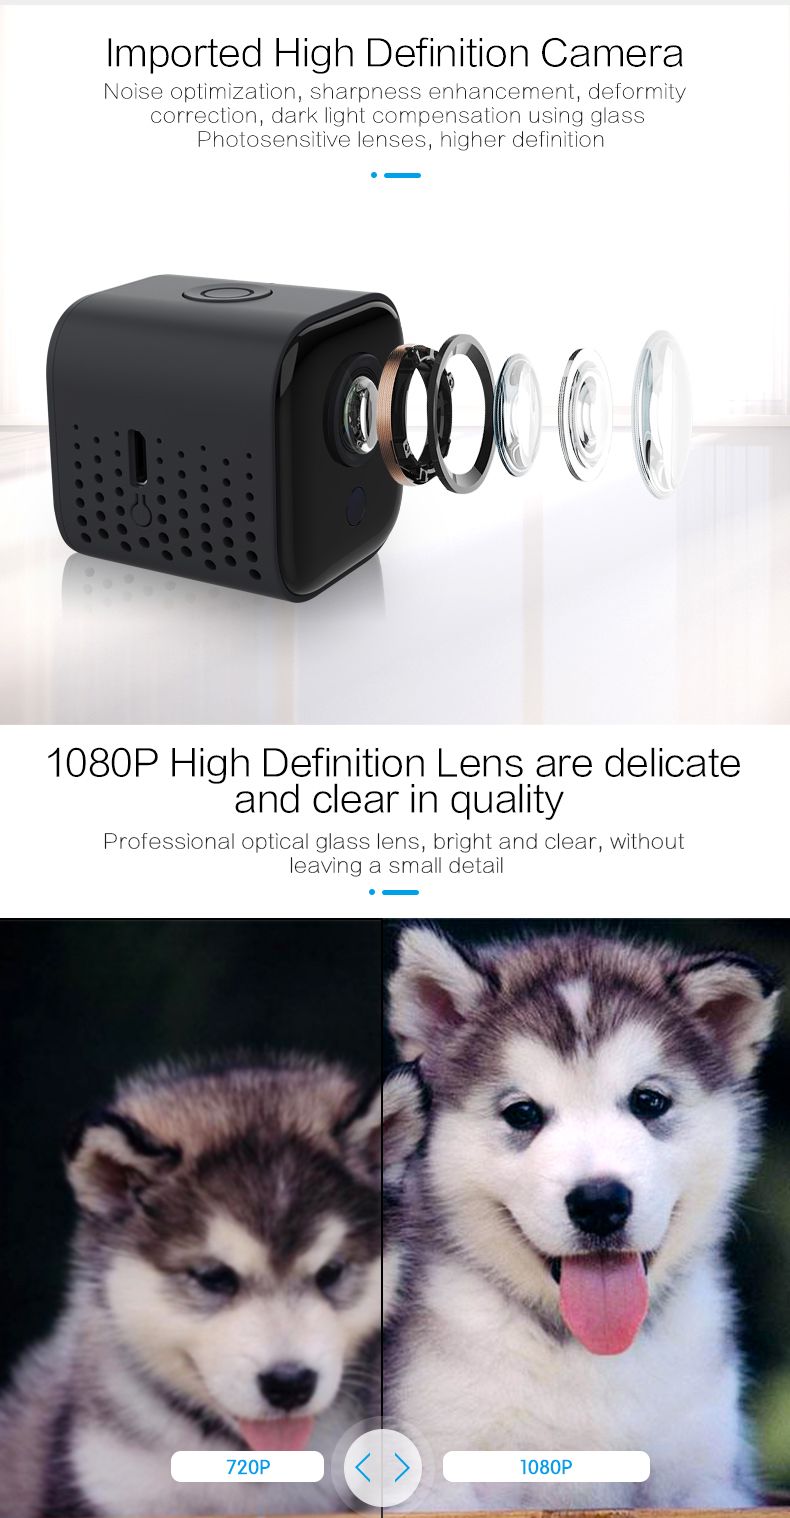 A11-Sport-Camera-1080P-High-Definition-Lens-360-Degree-Arbitrary-Installation-Two-Storage-Modes-1543190